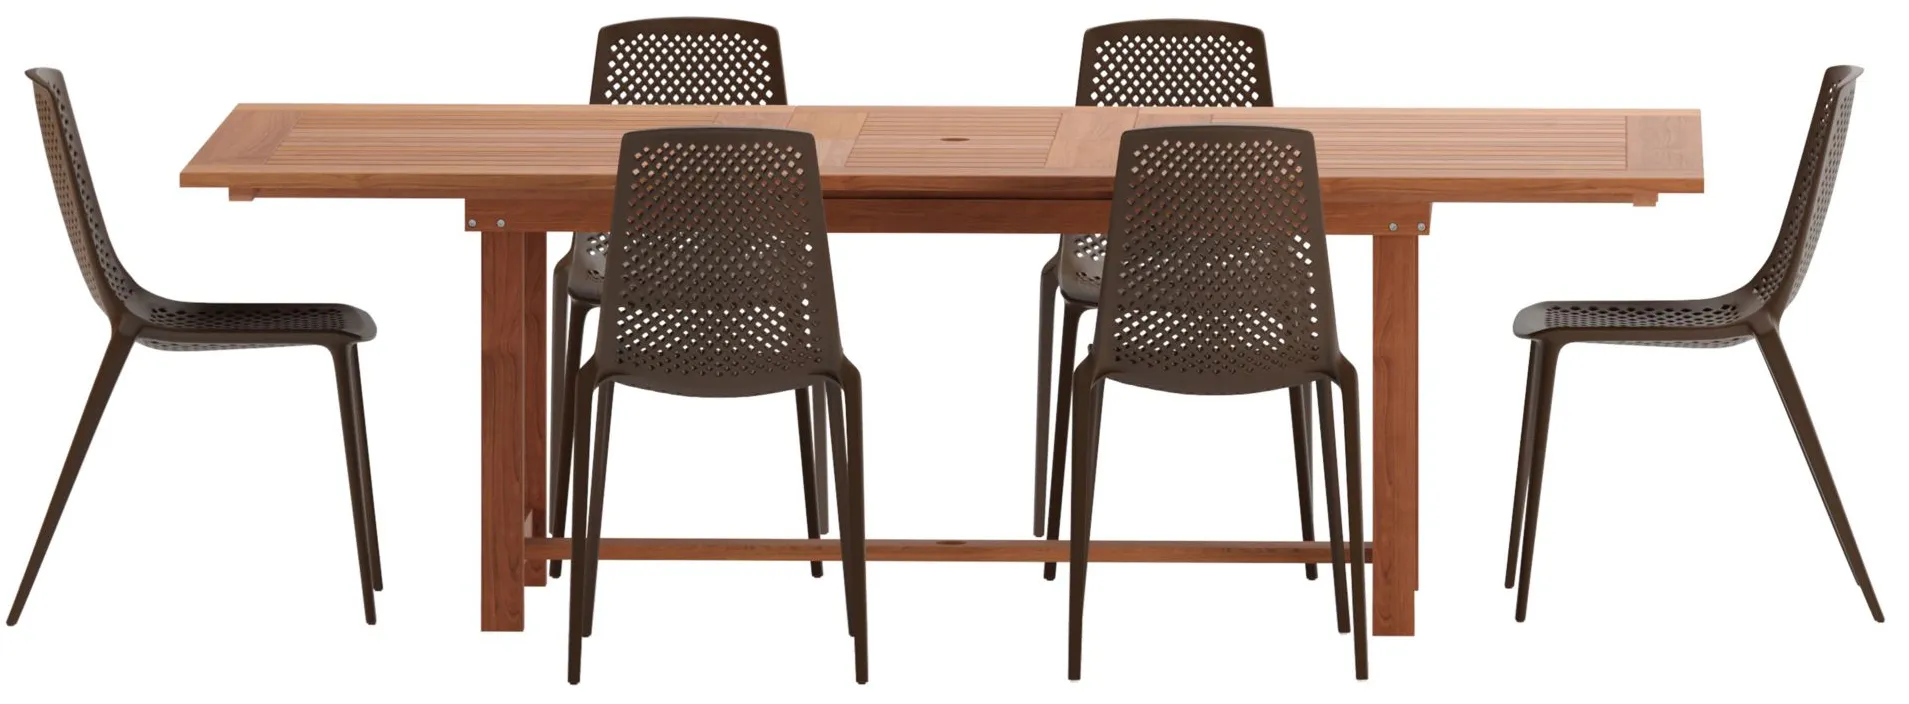 Amazonia 7-pc. Outdoor Rectangular Patio Dining Set in Charcoal by International Home Miami